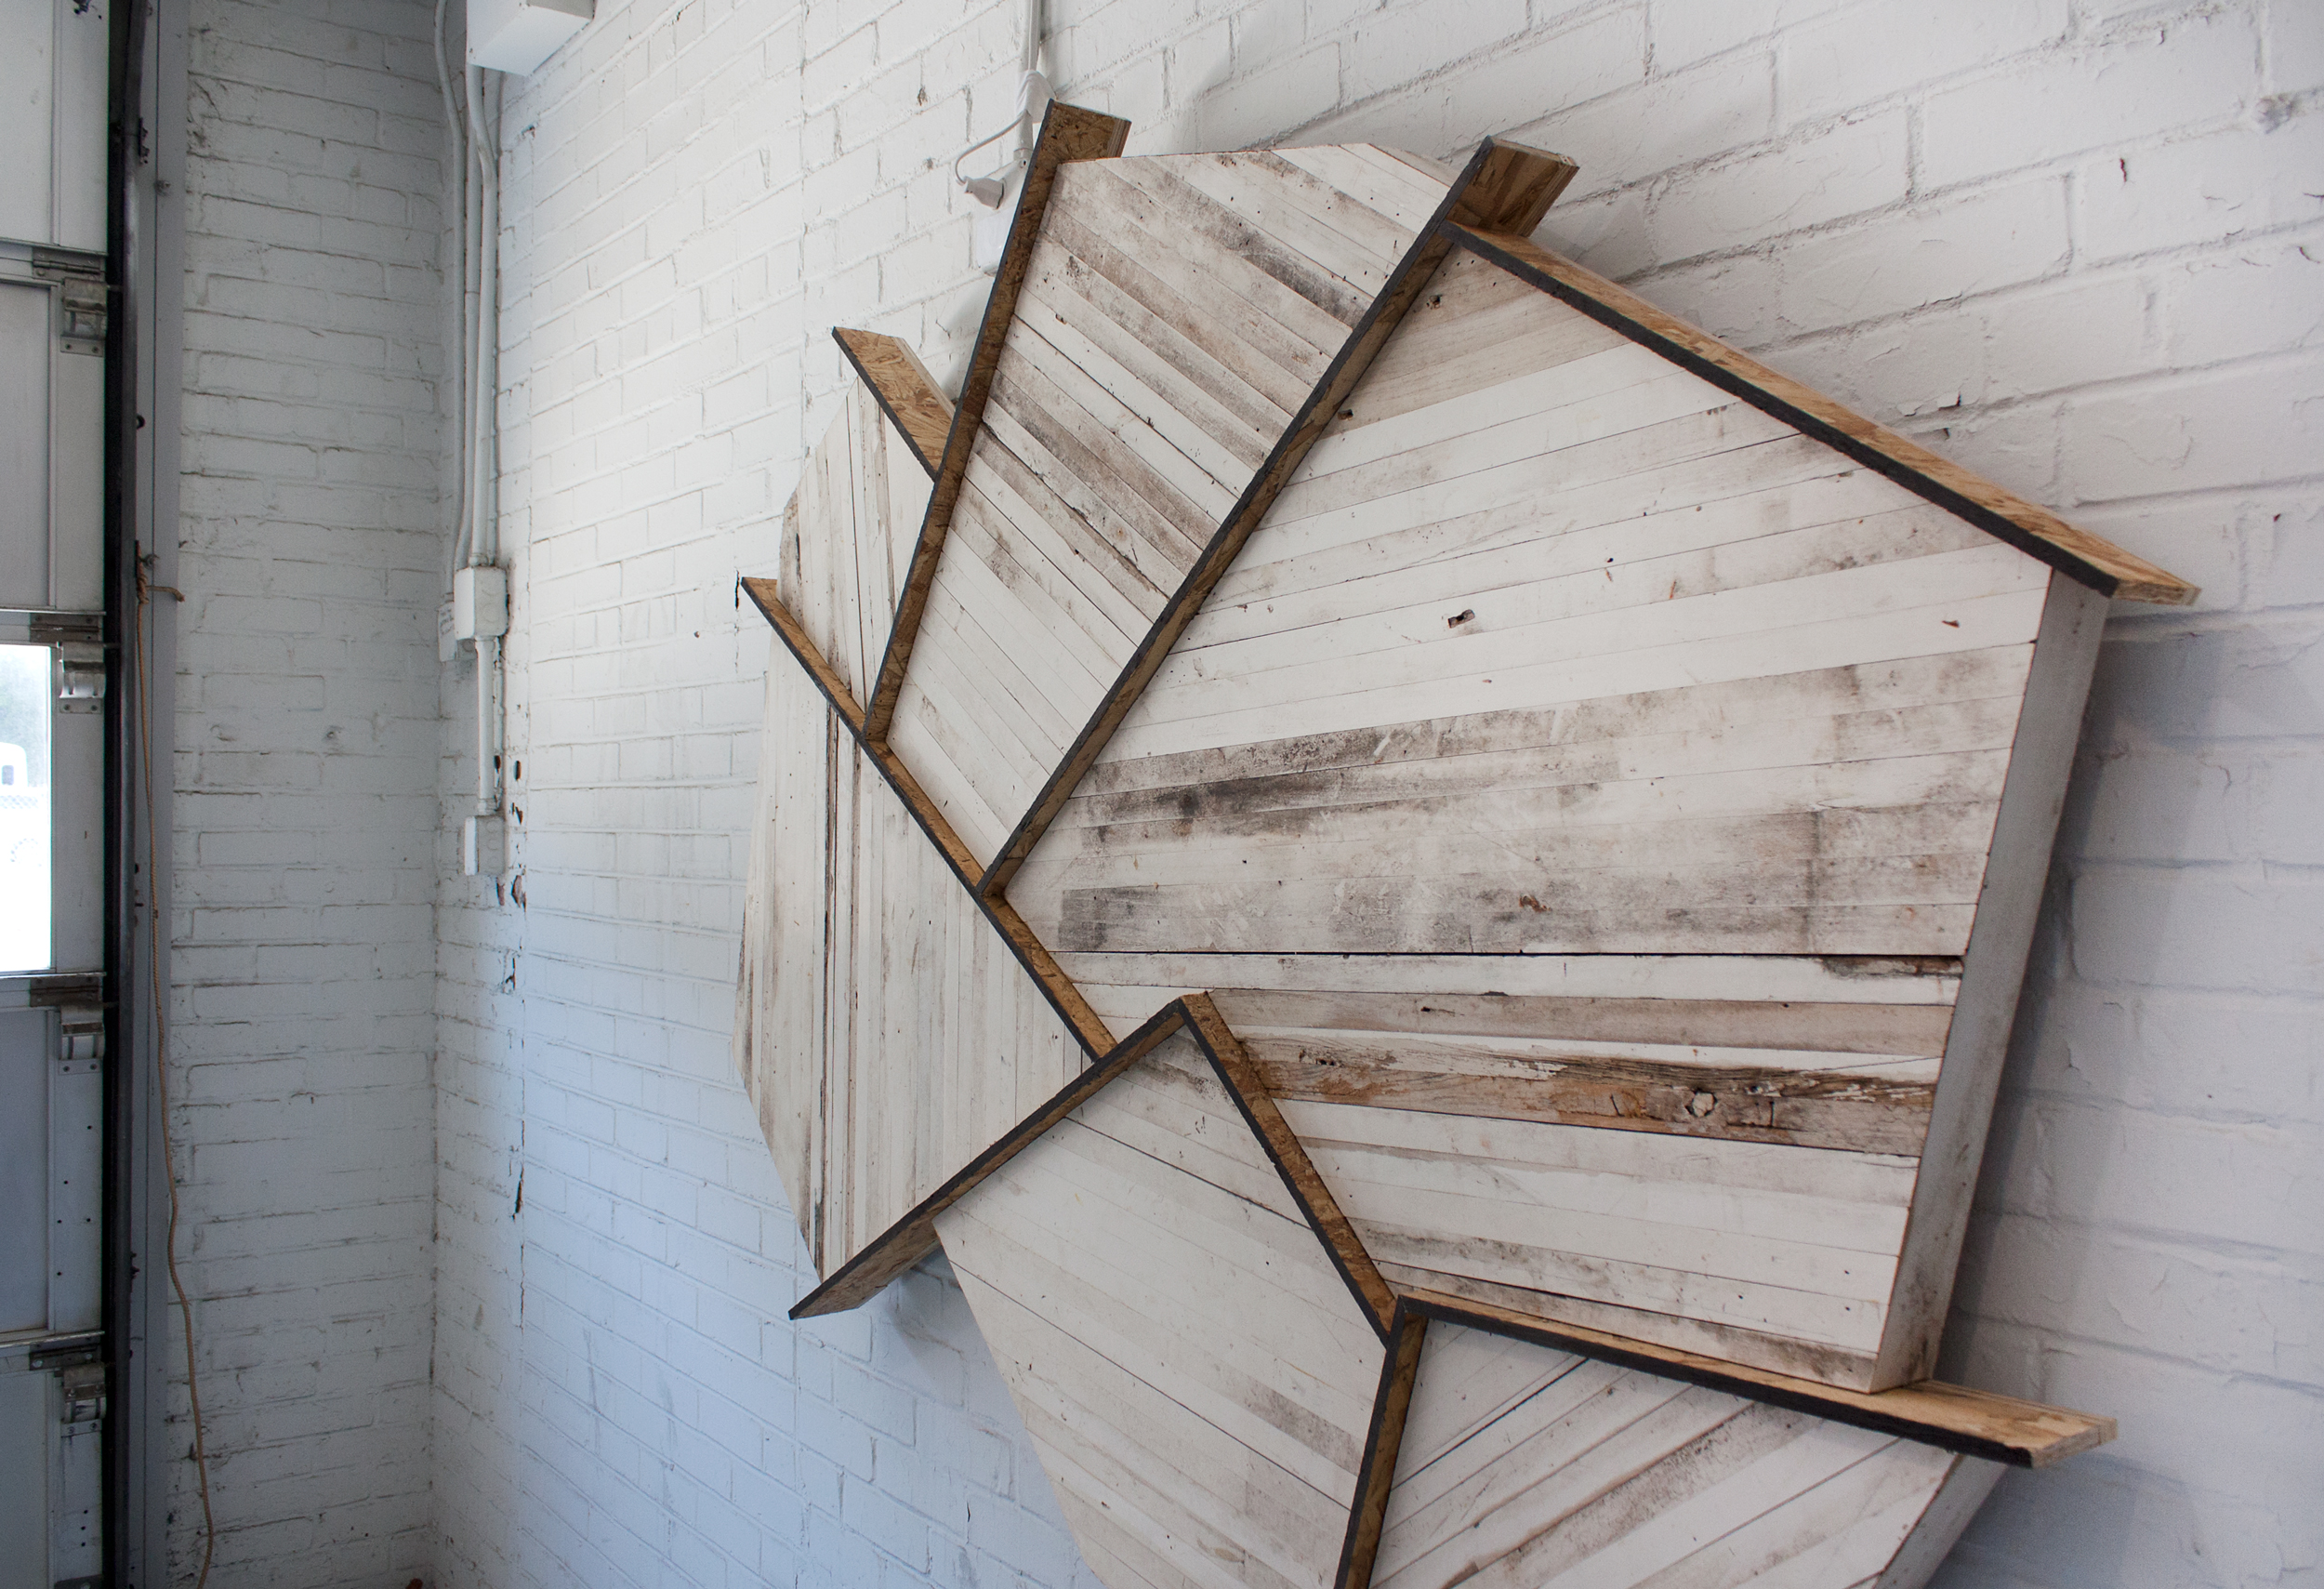   Stacked  - Discarded Wood, Plywood | 70 x 64 x 4 in 